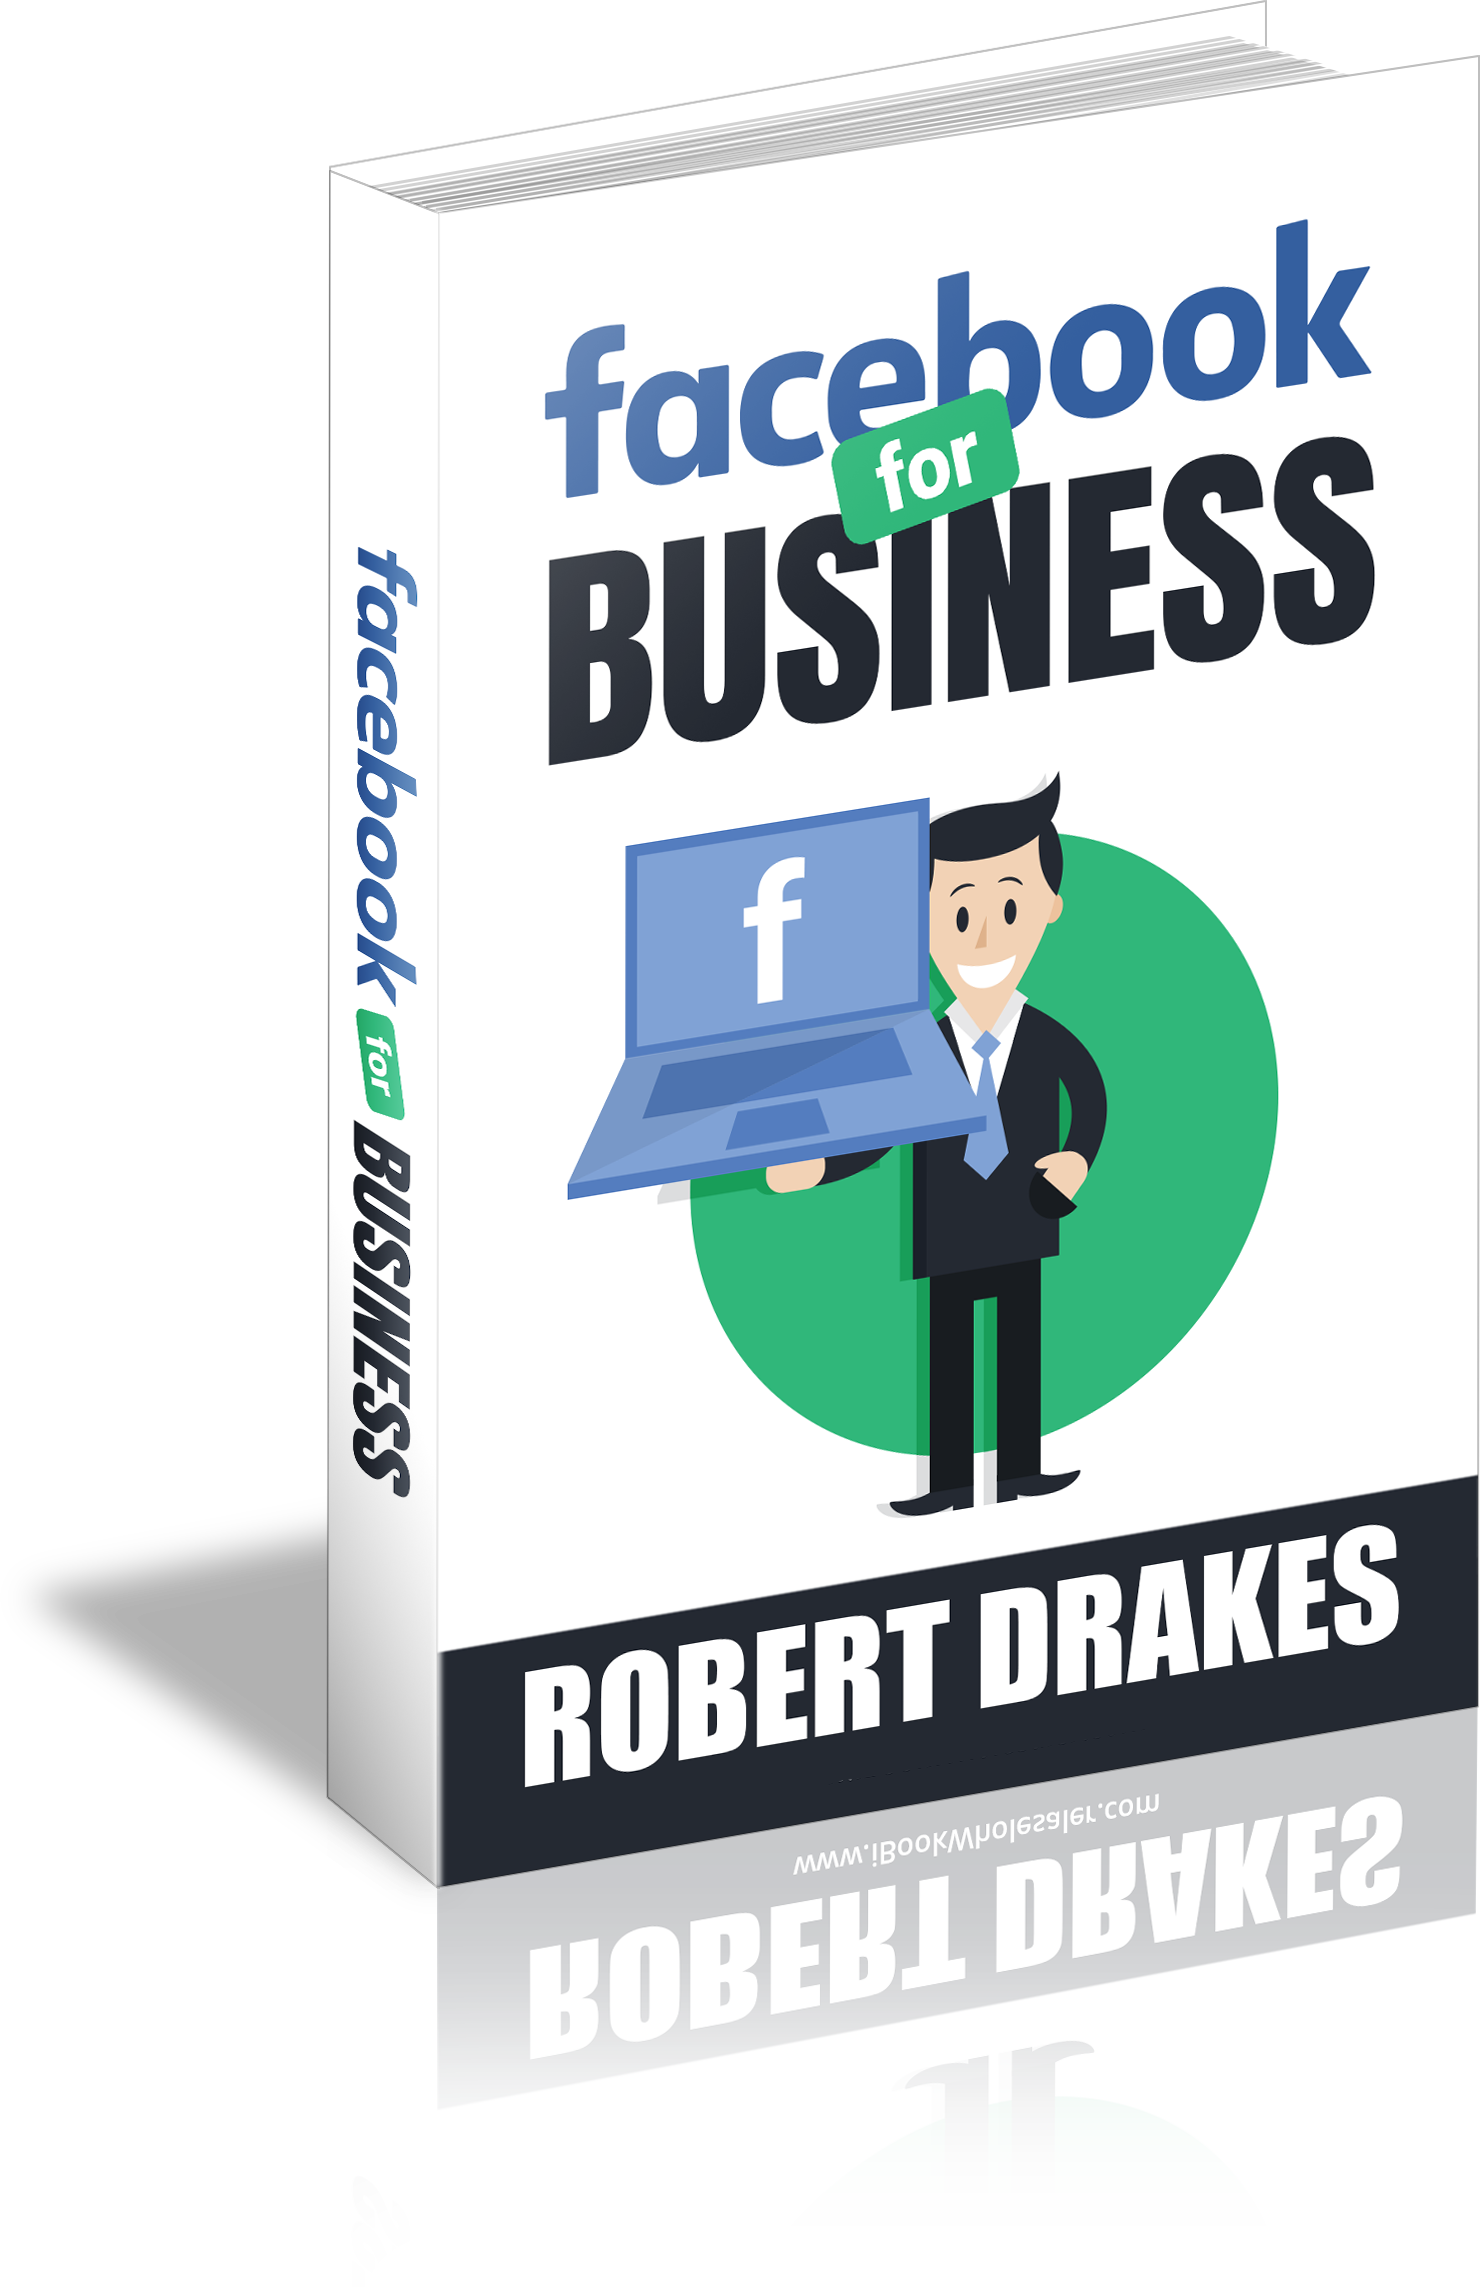 Facebook for Business(book)